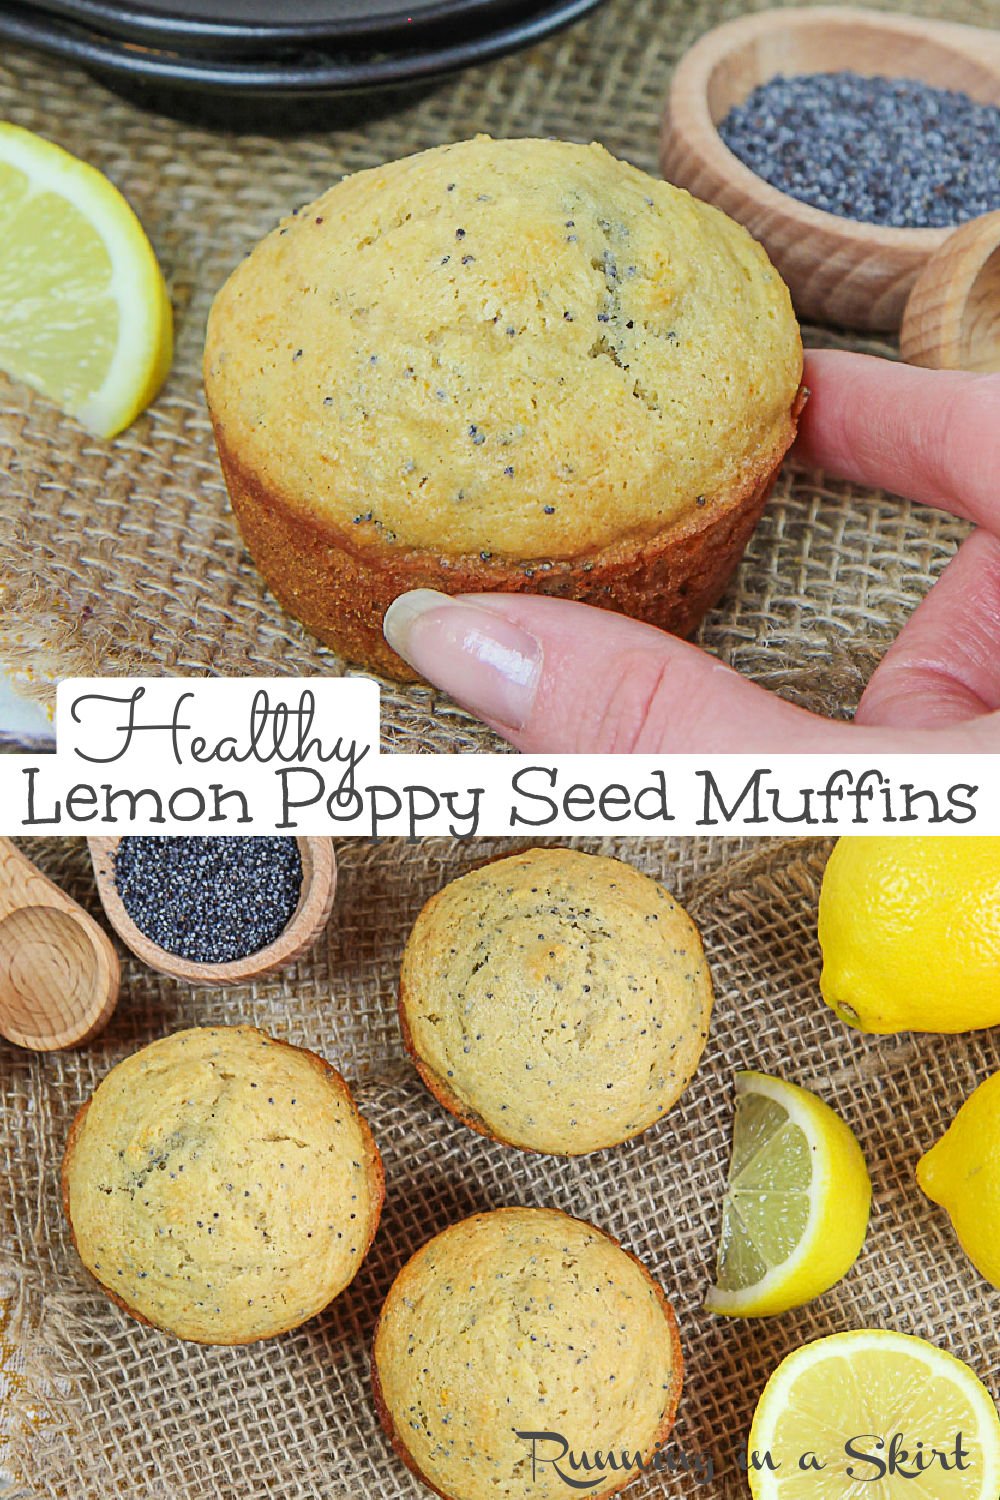 Healthy Lemon Poppy Seed Muffins recipe with greek yogurt, honey (no sugar -white), white-wheat flour, and coconut oil. These easy Lemon Poppyseed Muffins are perfect for breakfast or a healthy snack. Looking for healthy lemon muffin recipes? This one is light, fluffy and delicious. Clean Eating and great for kids for toddlers or for adults. / Running in a Skirt #healthybaking #healthymuffins #lemonpoppyseed #healthyliving #greekyogurt #lemon via @juliewunder